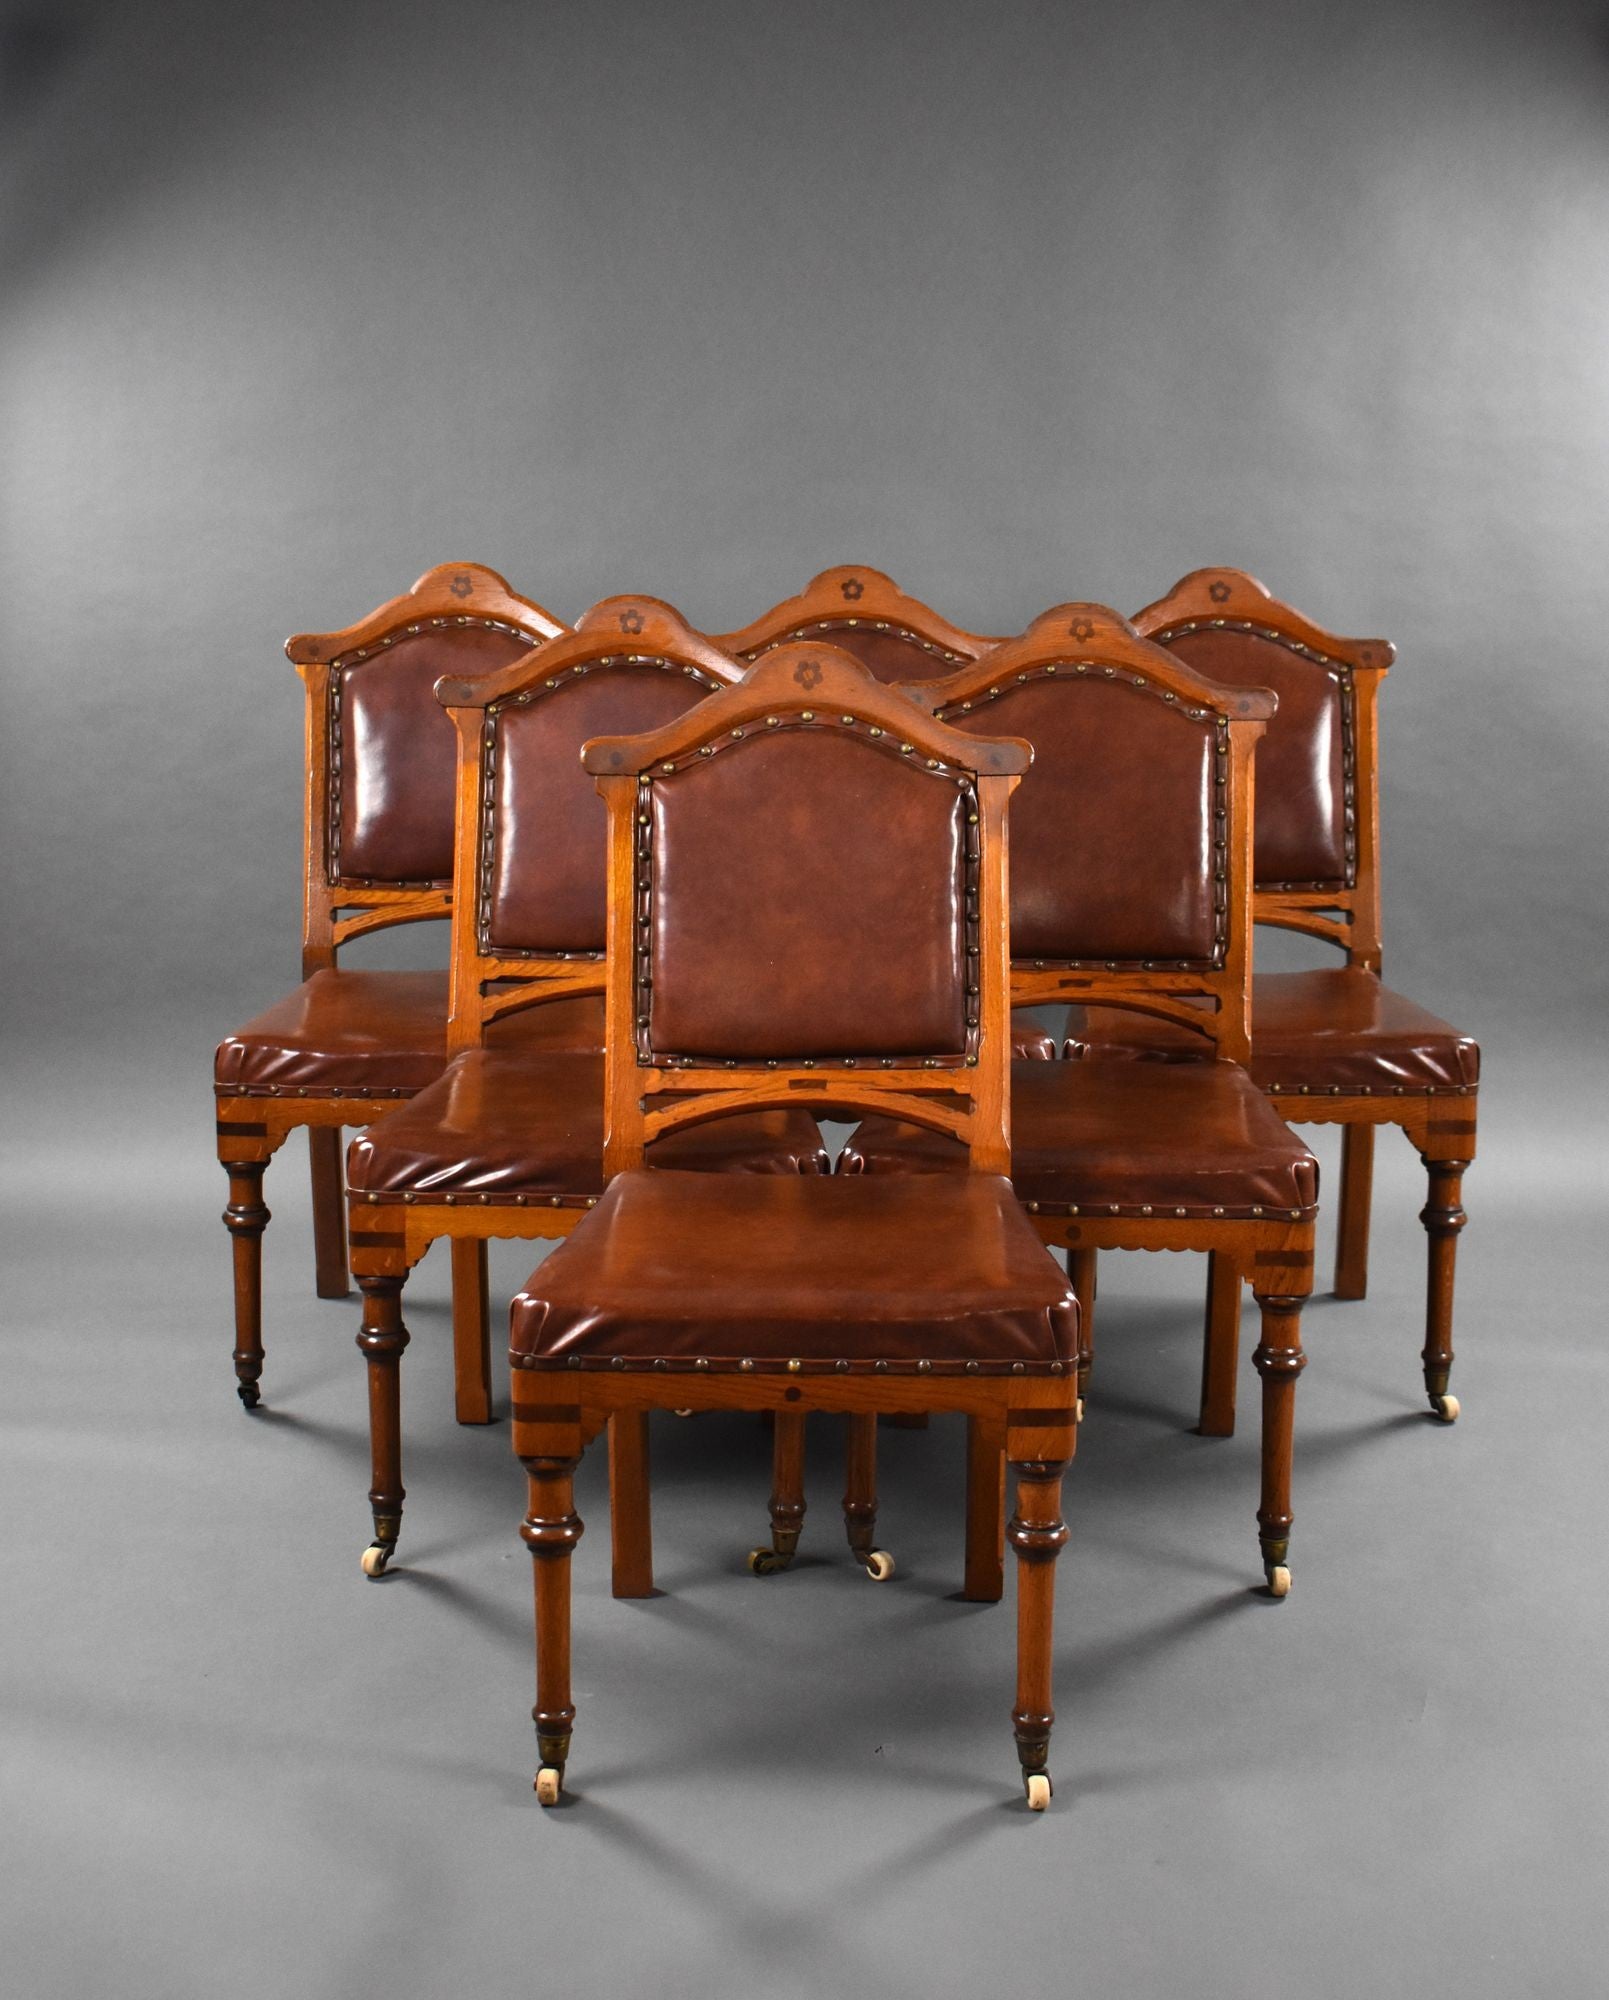 Set of 6 19th Century English Victorian Oak Dining Chairs